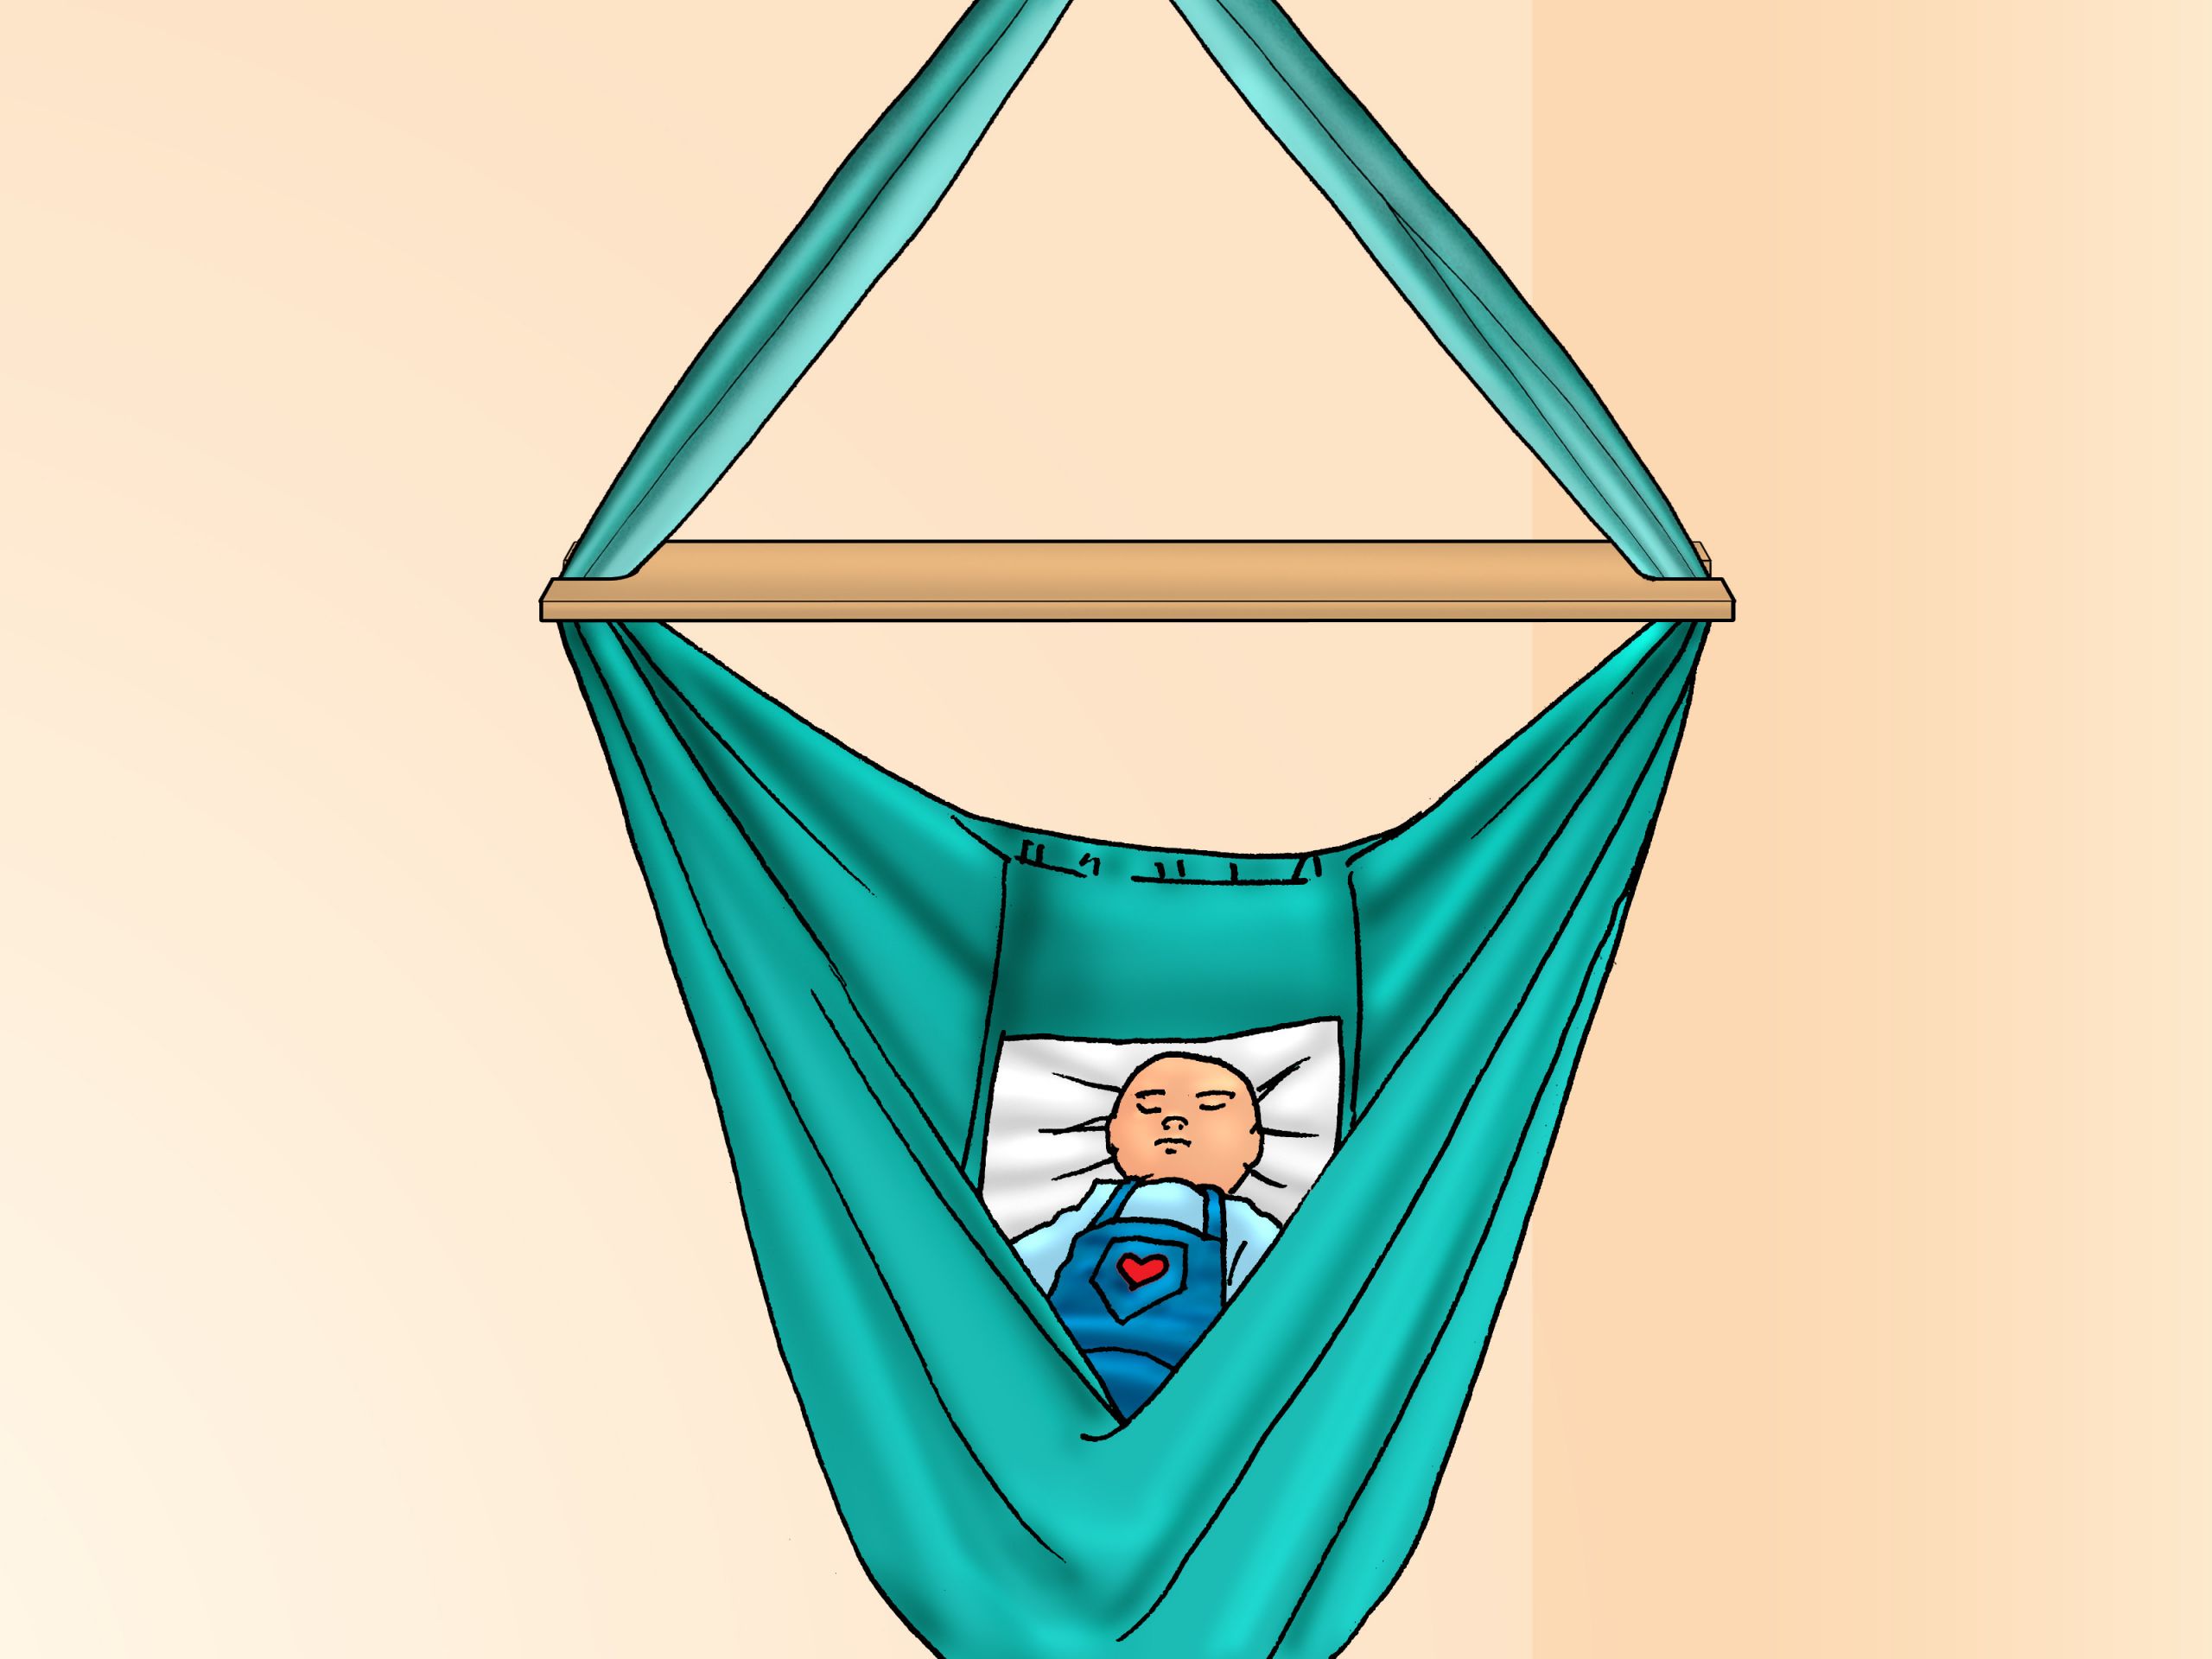 The 20 Best Ideas for Diy Baby Hammock - Home, Family, Style and Art Ideas